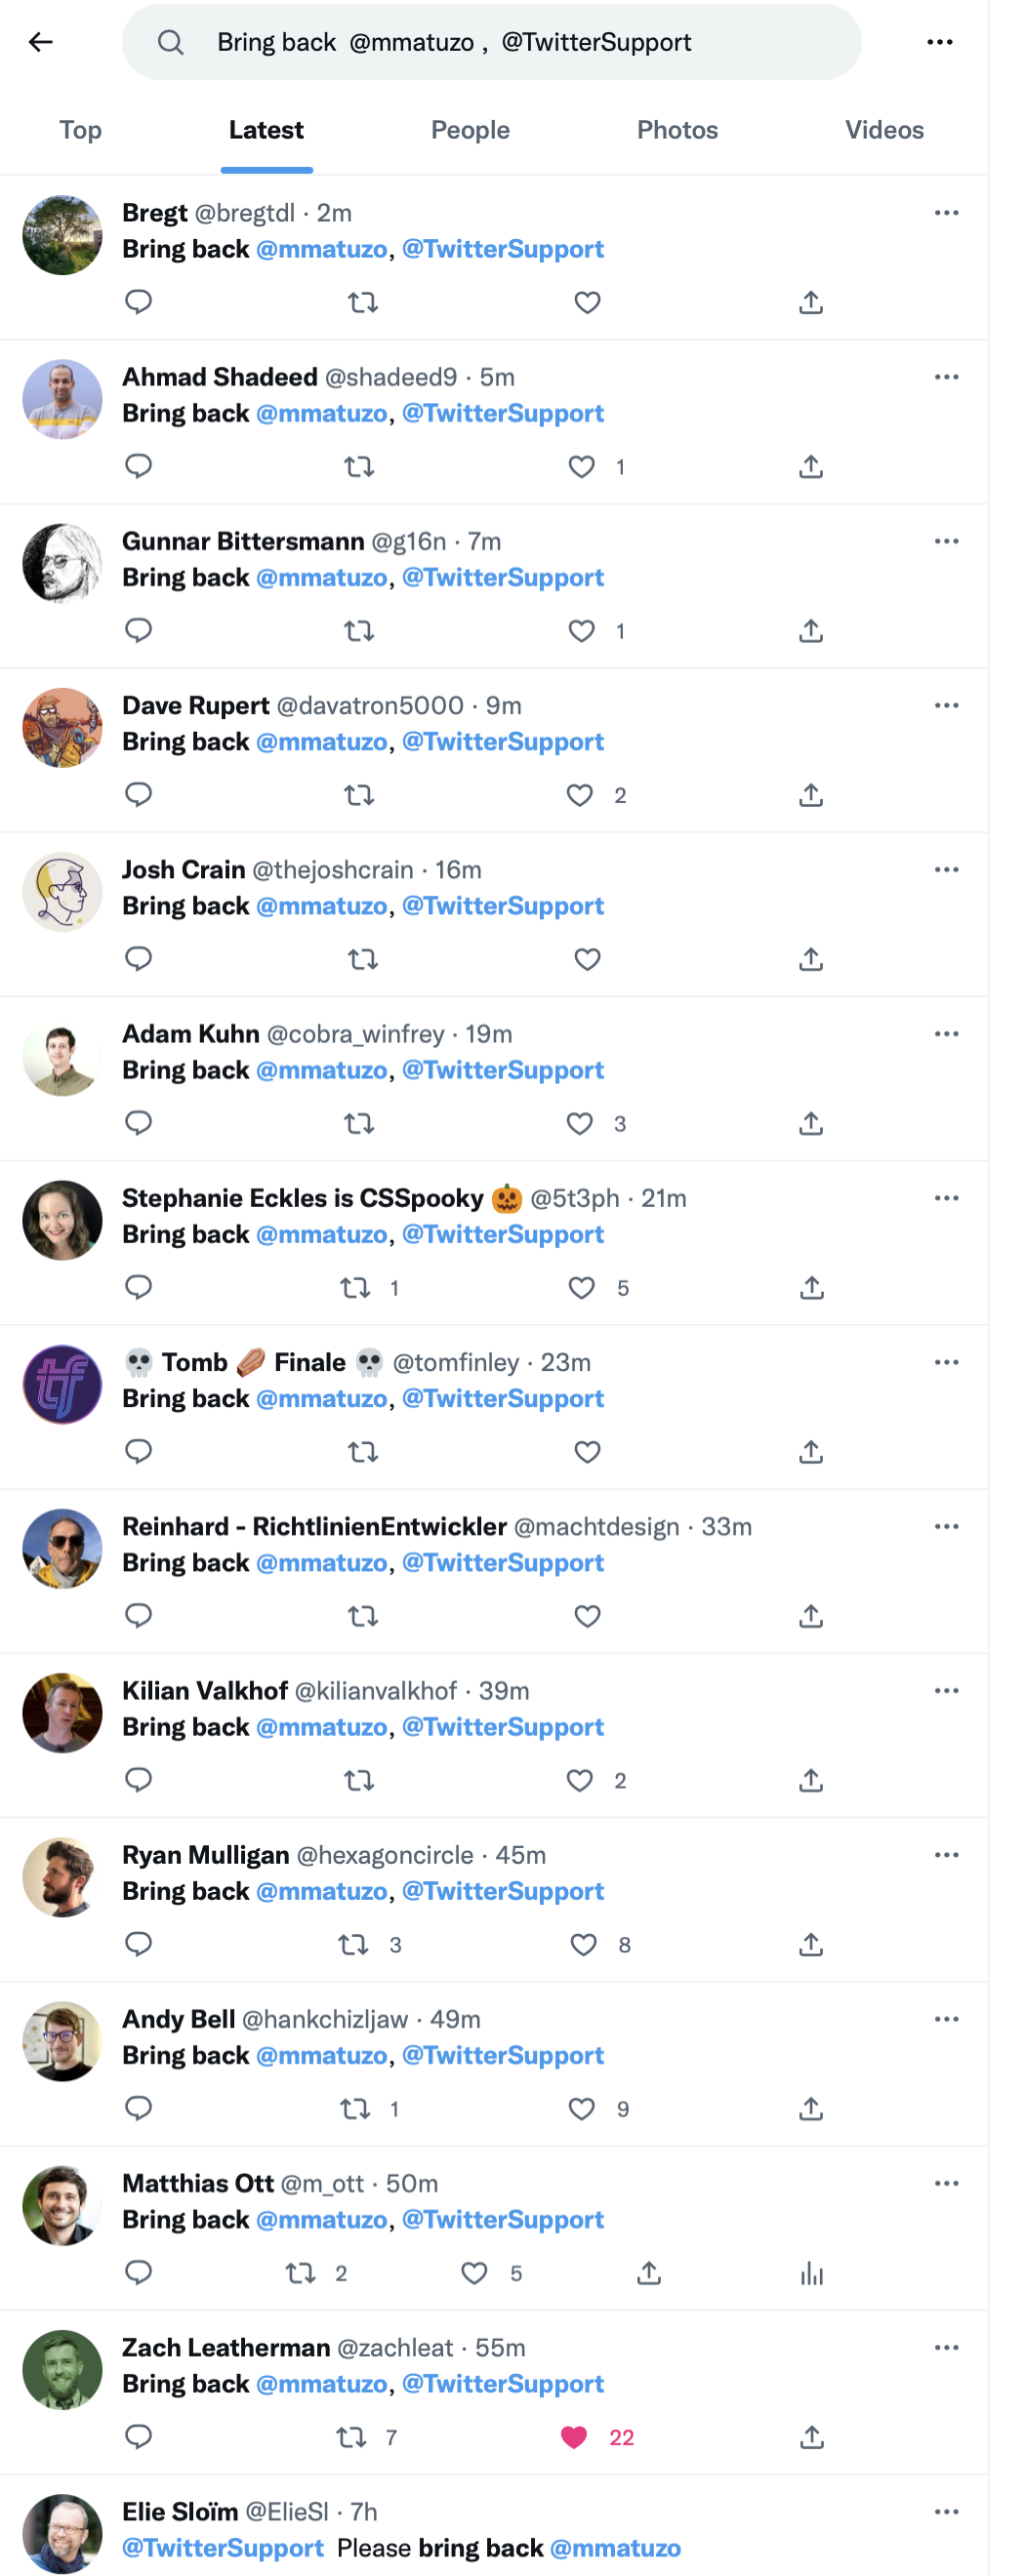 Twitter search for 'Bring back @mmatuzo, @TwitterSupport' showing dozens of results by all kinds of people.